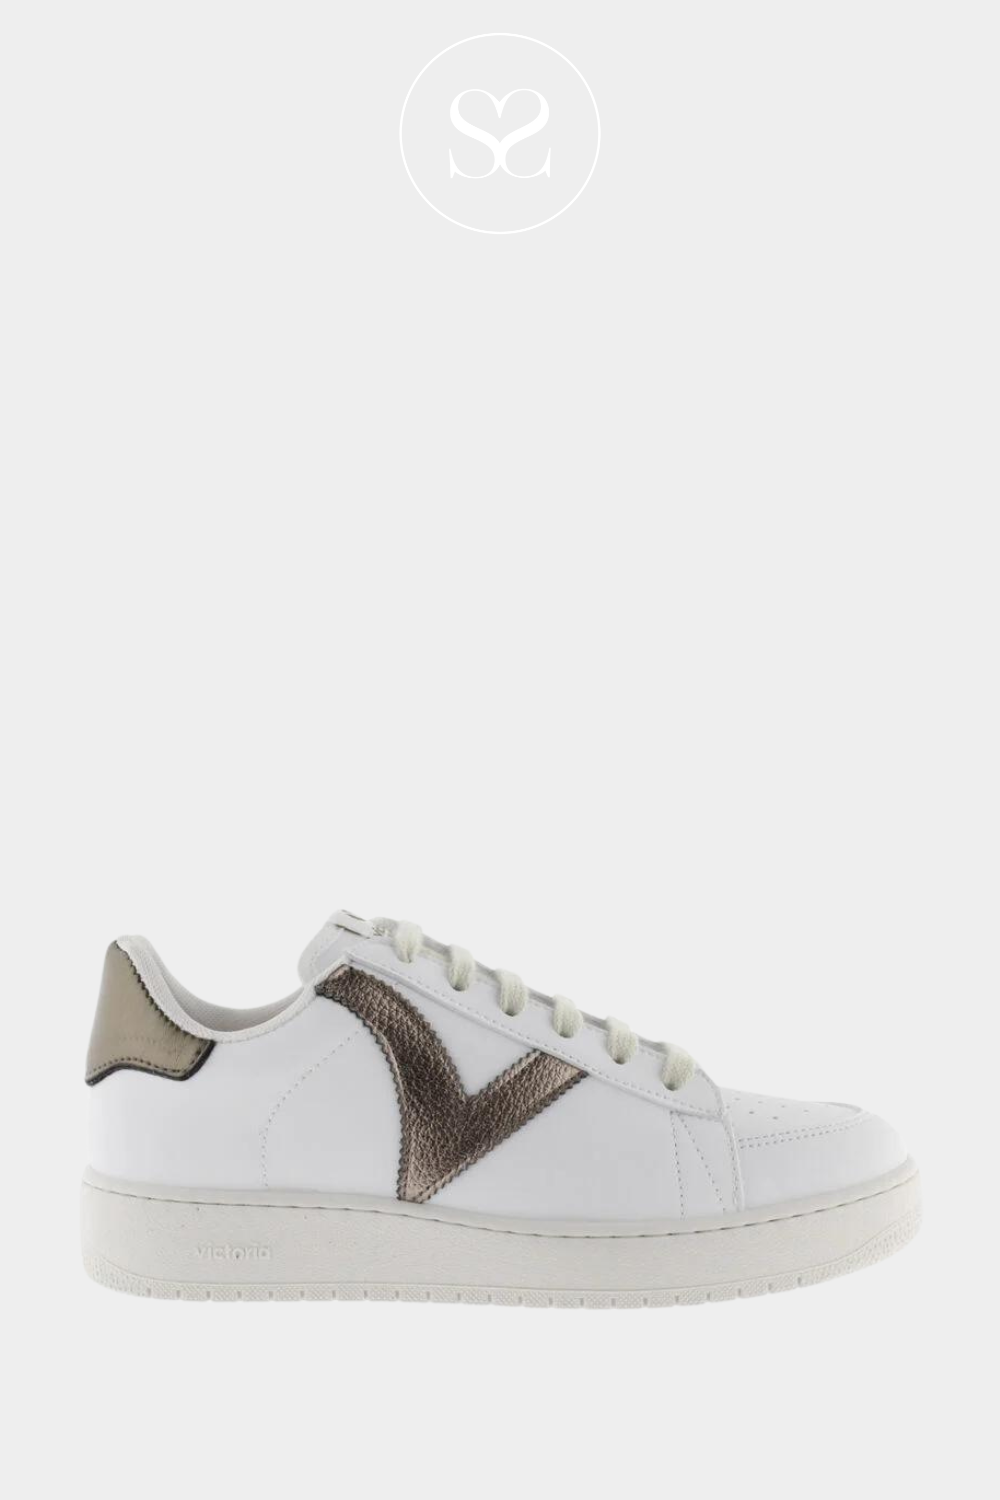 VICTORIA 1-258202 WHITE FLATFORM TRAINERS WITH BRONZE V LOGO, LACES AND PERFORATED BREATHABLE HOLES